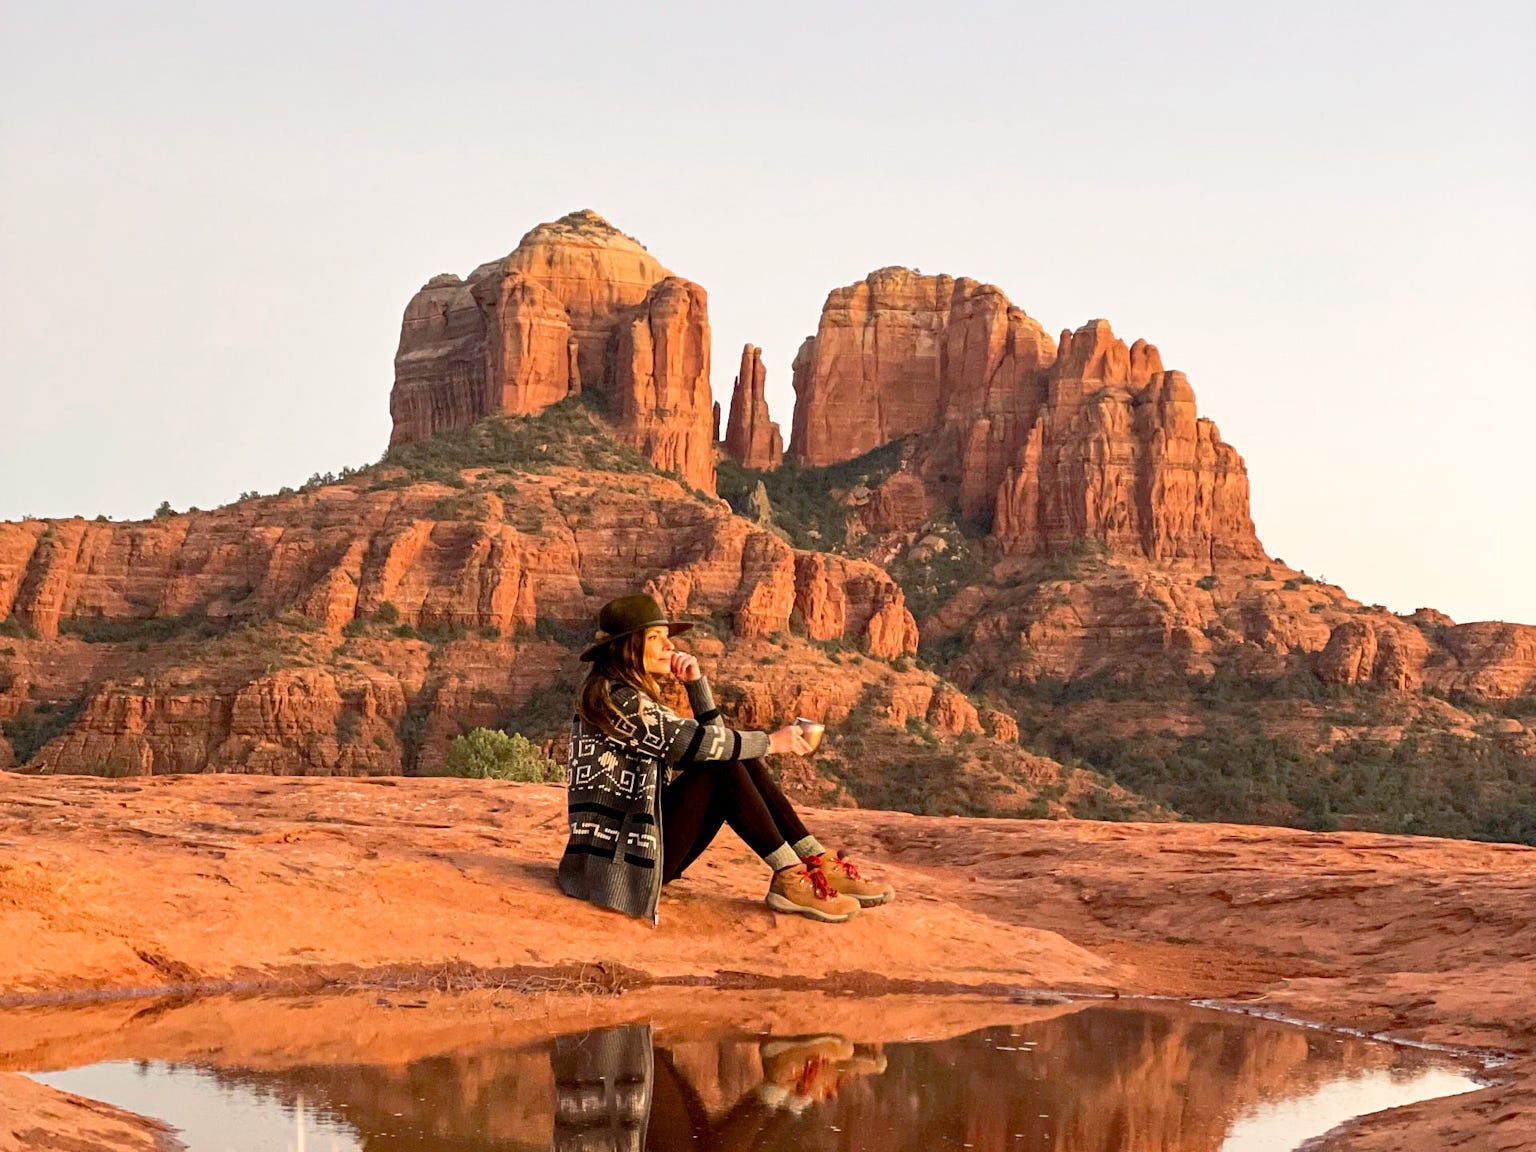 <p>Arizona is well known for the Grand Canyon, but the state has much more to offer. From Flagstaff's high-altitude forests to Sedona's iconic red rocks, Arizona's diversity is surprising and worth a trip.</p><p>I love hiking among the cacti in Sedona or Scottsdale before heading to one of the many resorts to jump in a pool or hit the spa — the perfect escape for adventure and relaxation.</p>